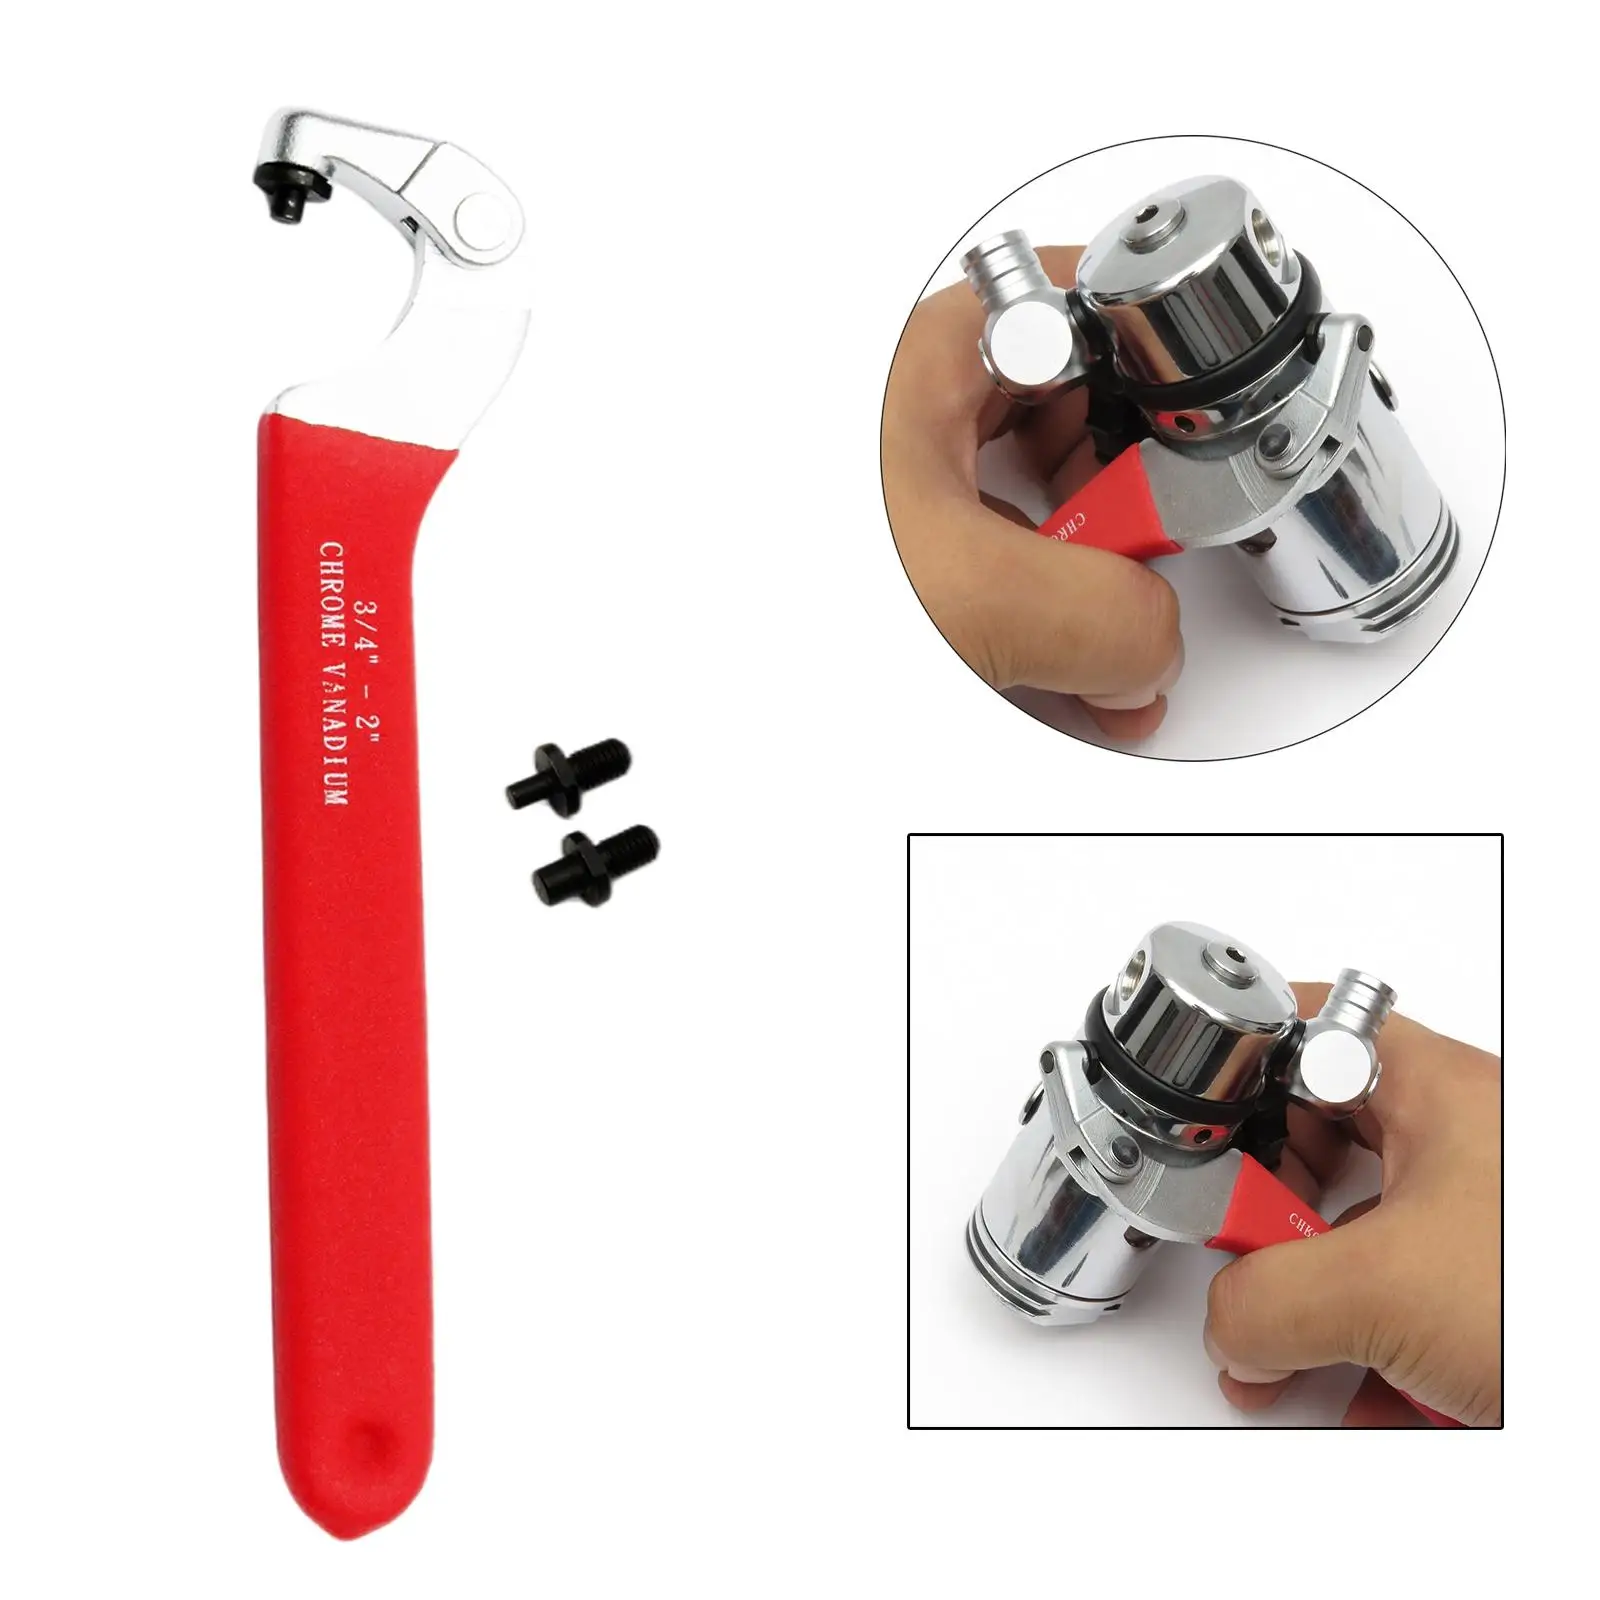 Adjustable Scuba Diving Spanner Wrench  Tool Maintenance  Stage Regulator Carbon Steel for Water Sports Supplies